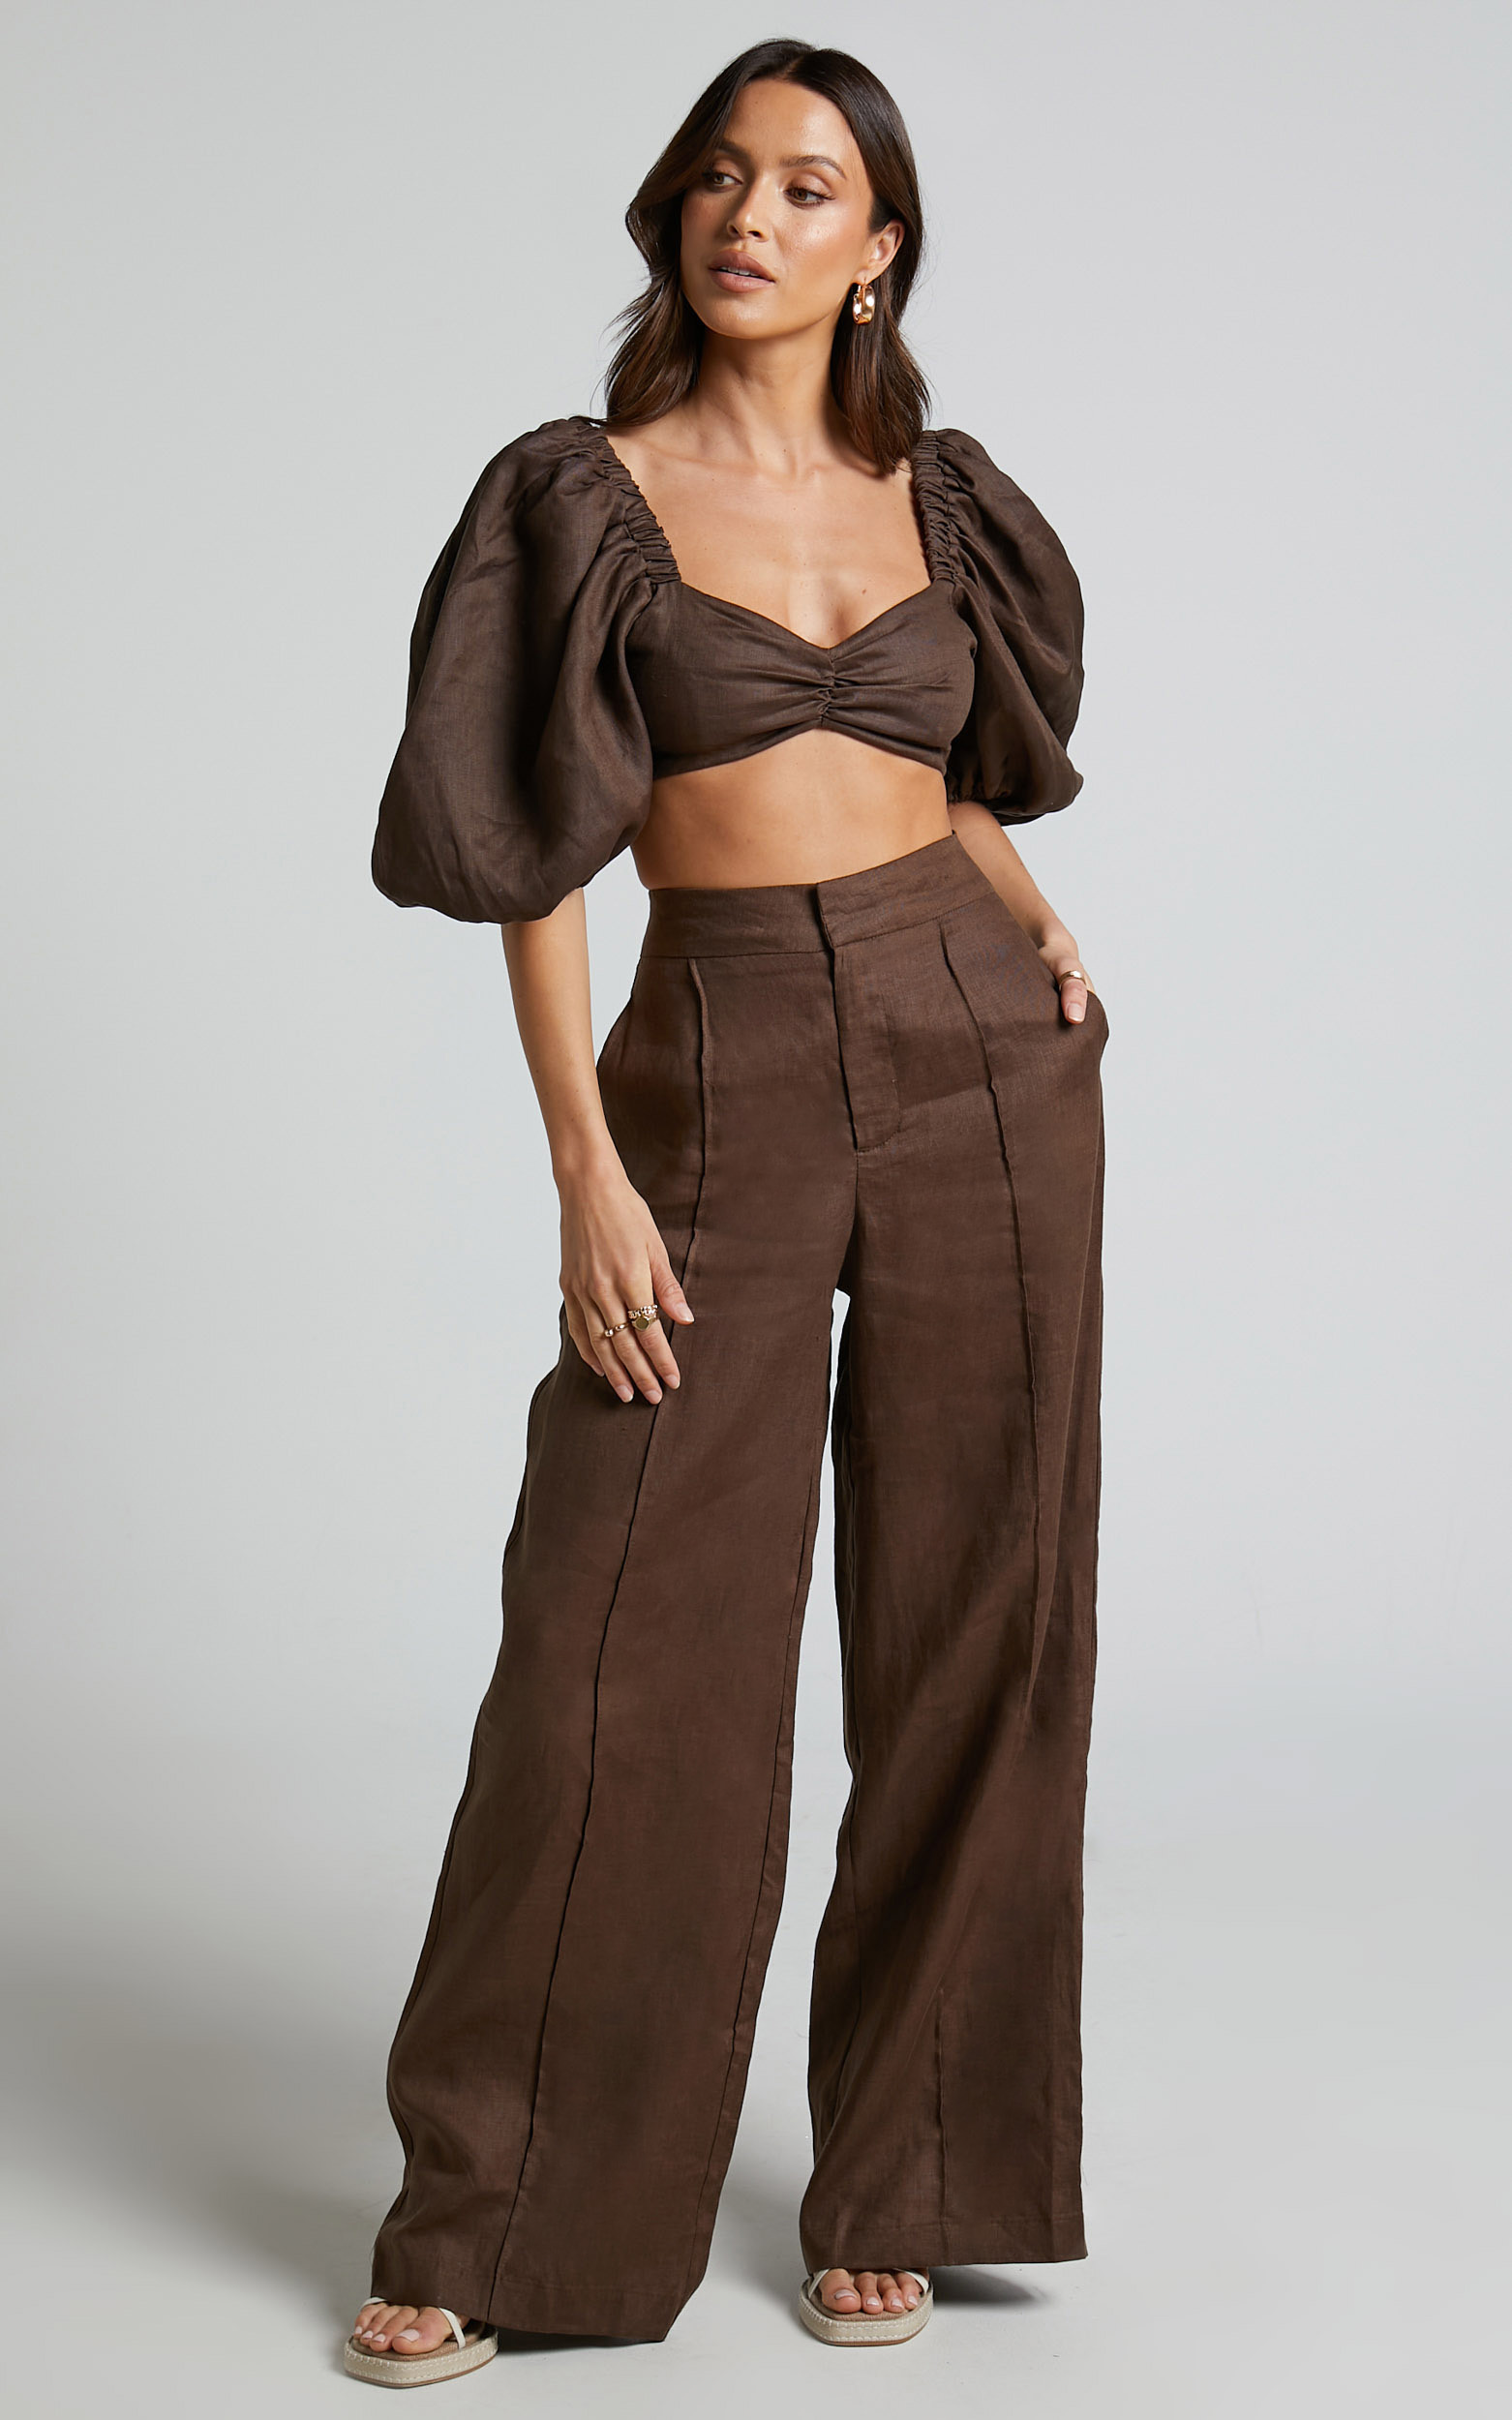 Amalie The Label - Aleydise Linen Wide Leg Pants in Chocolate - 06, BRN1, hi-res image number null